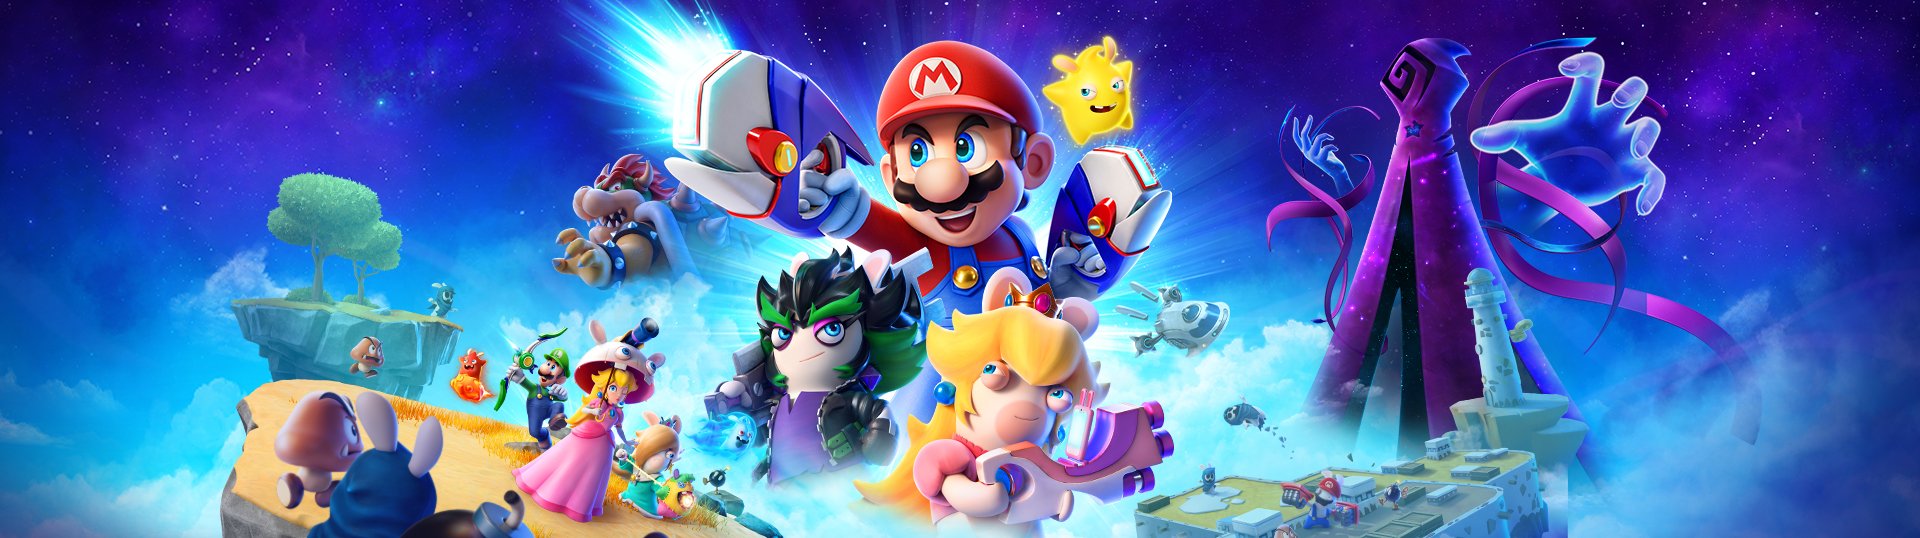 download mario and rabbids sparks of hope rayman